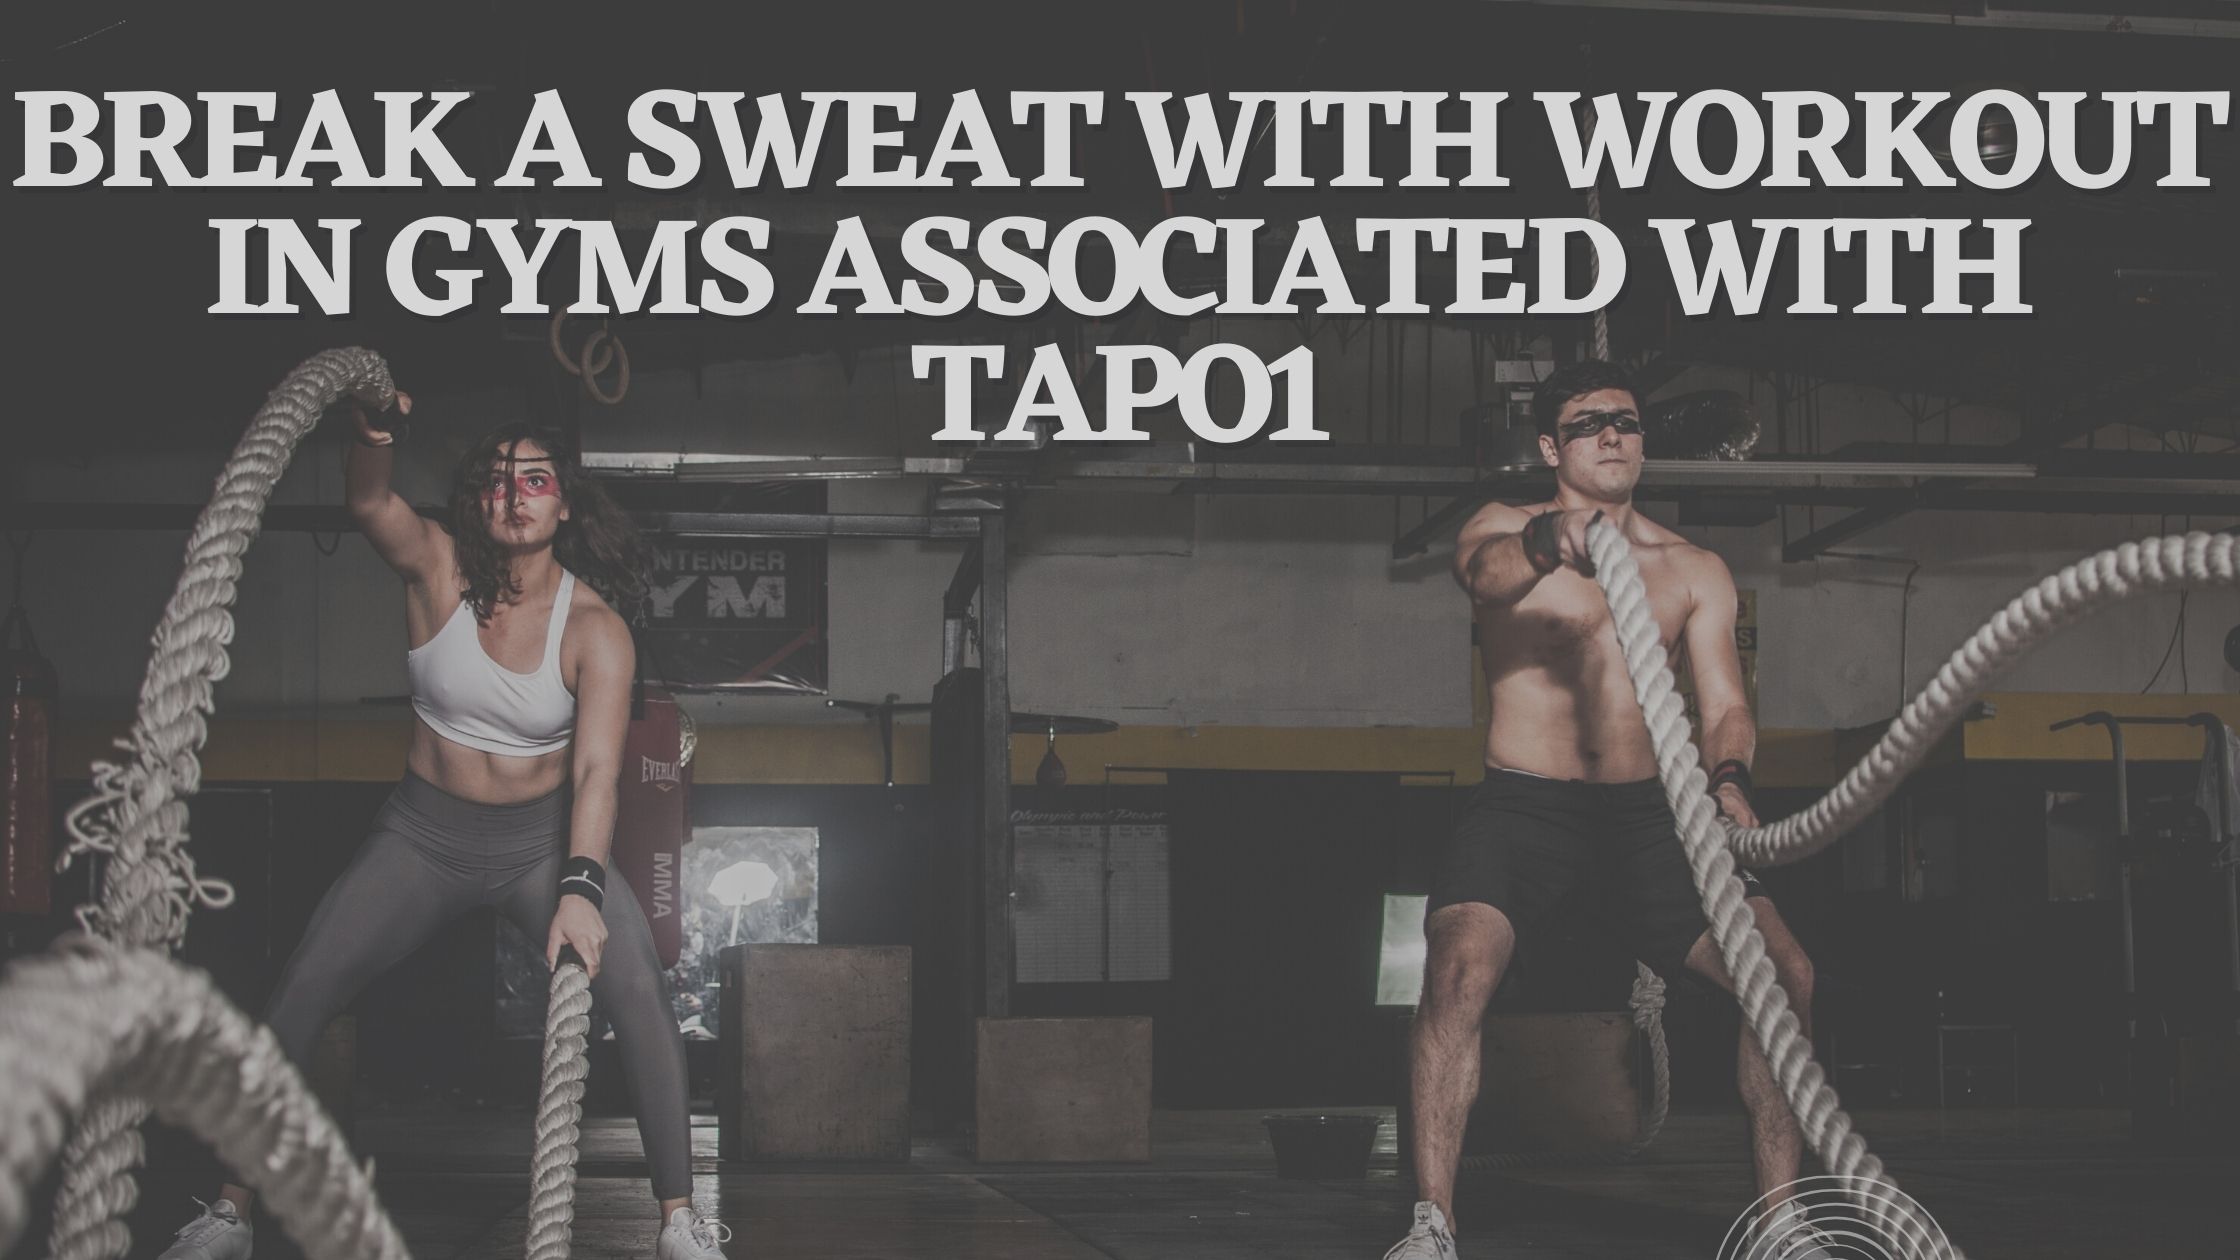 Break a sweat with workout in gyms associated with Tapo1